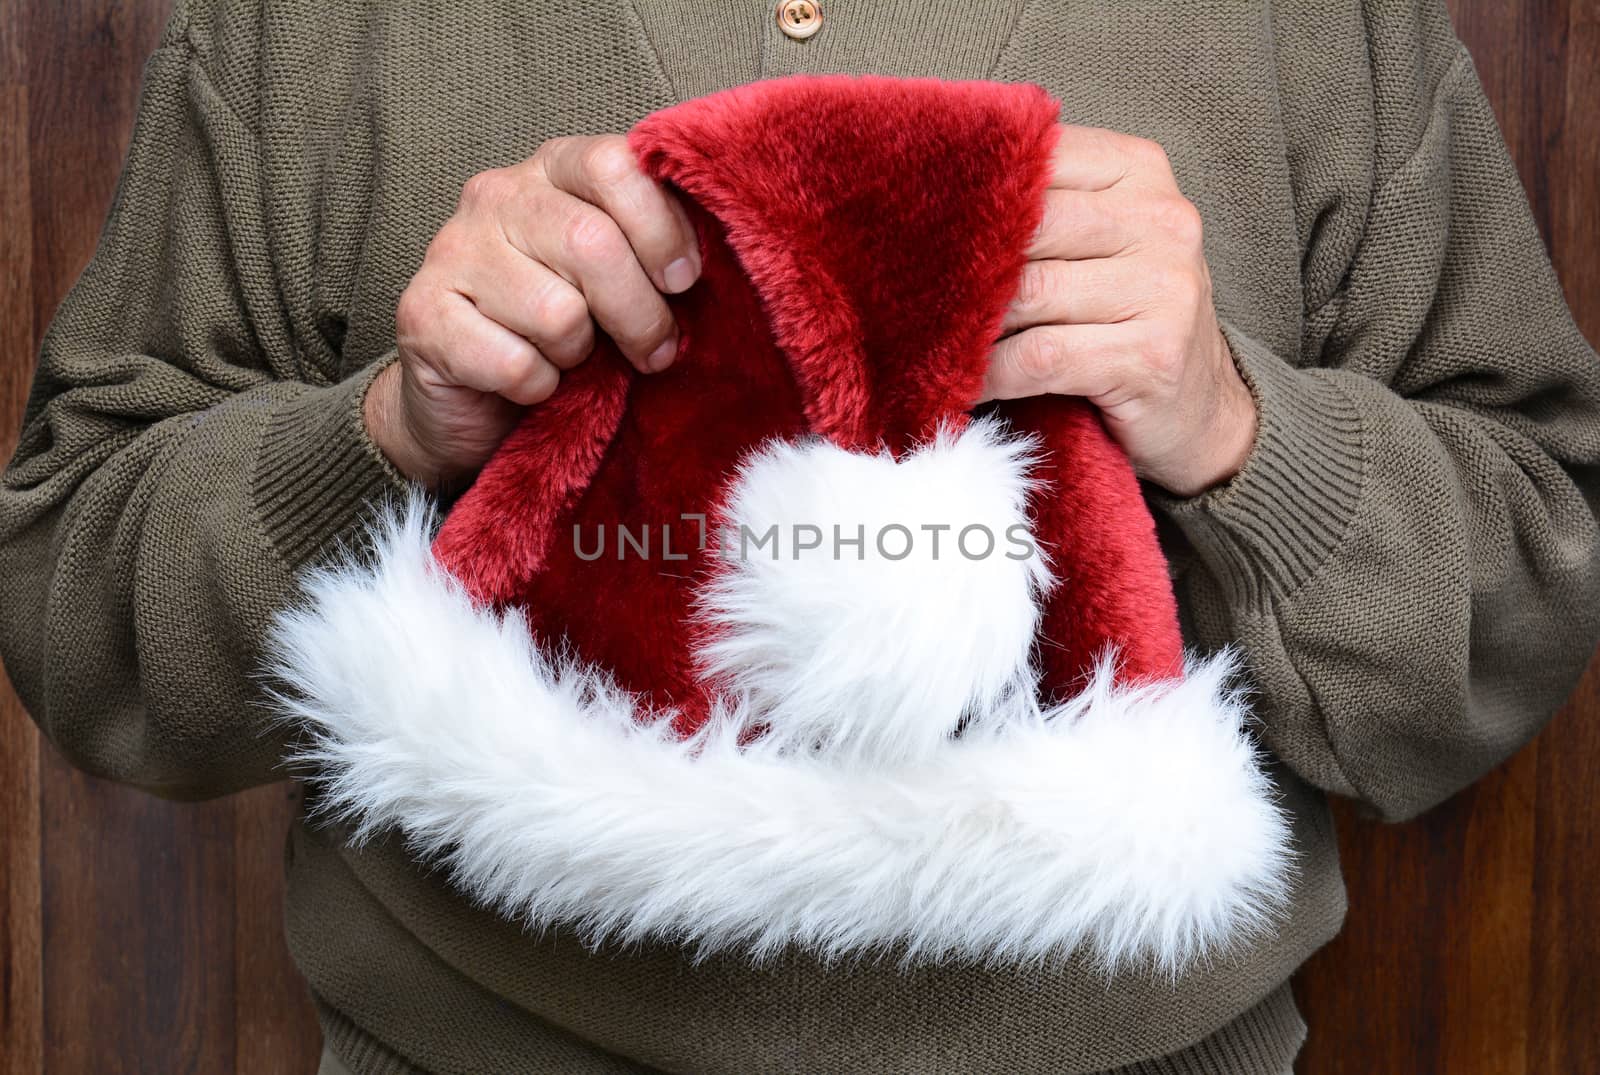 A man wearing a green sweater holding a Santa Claus hat in front of his torso. Man is unrecognizable. Horizontal format.